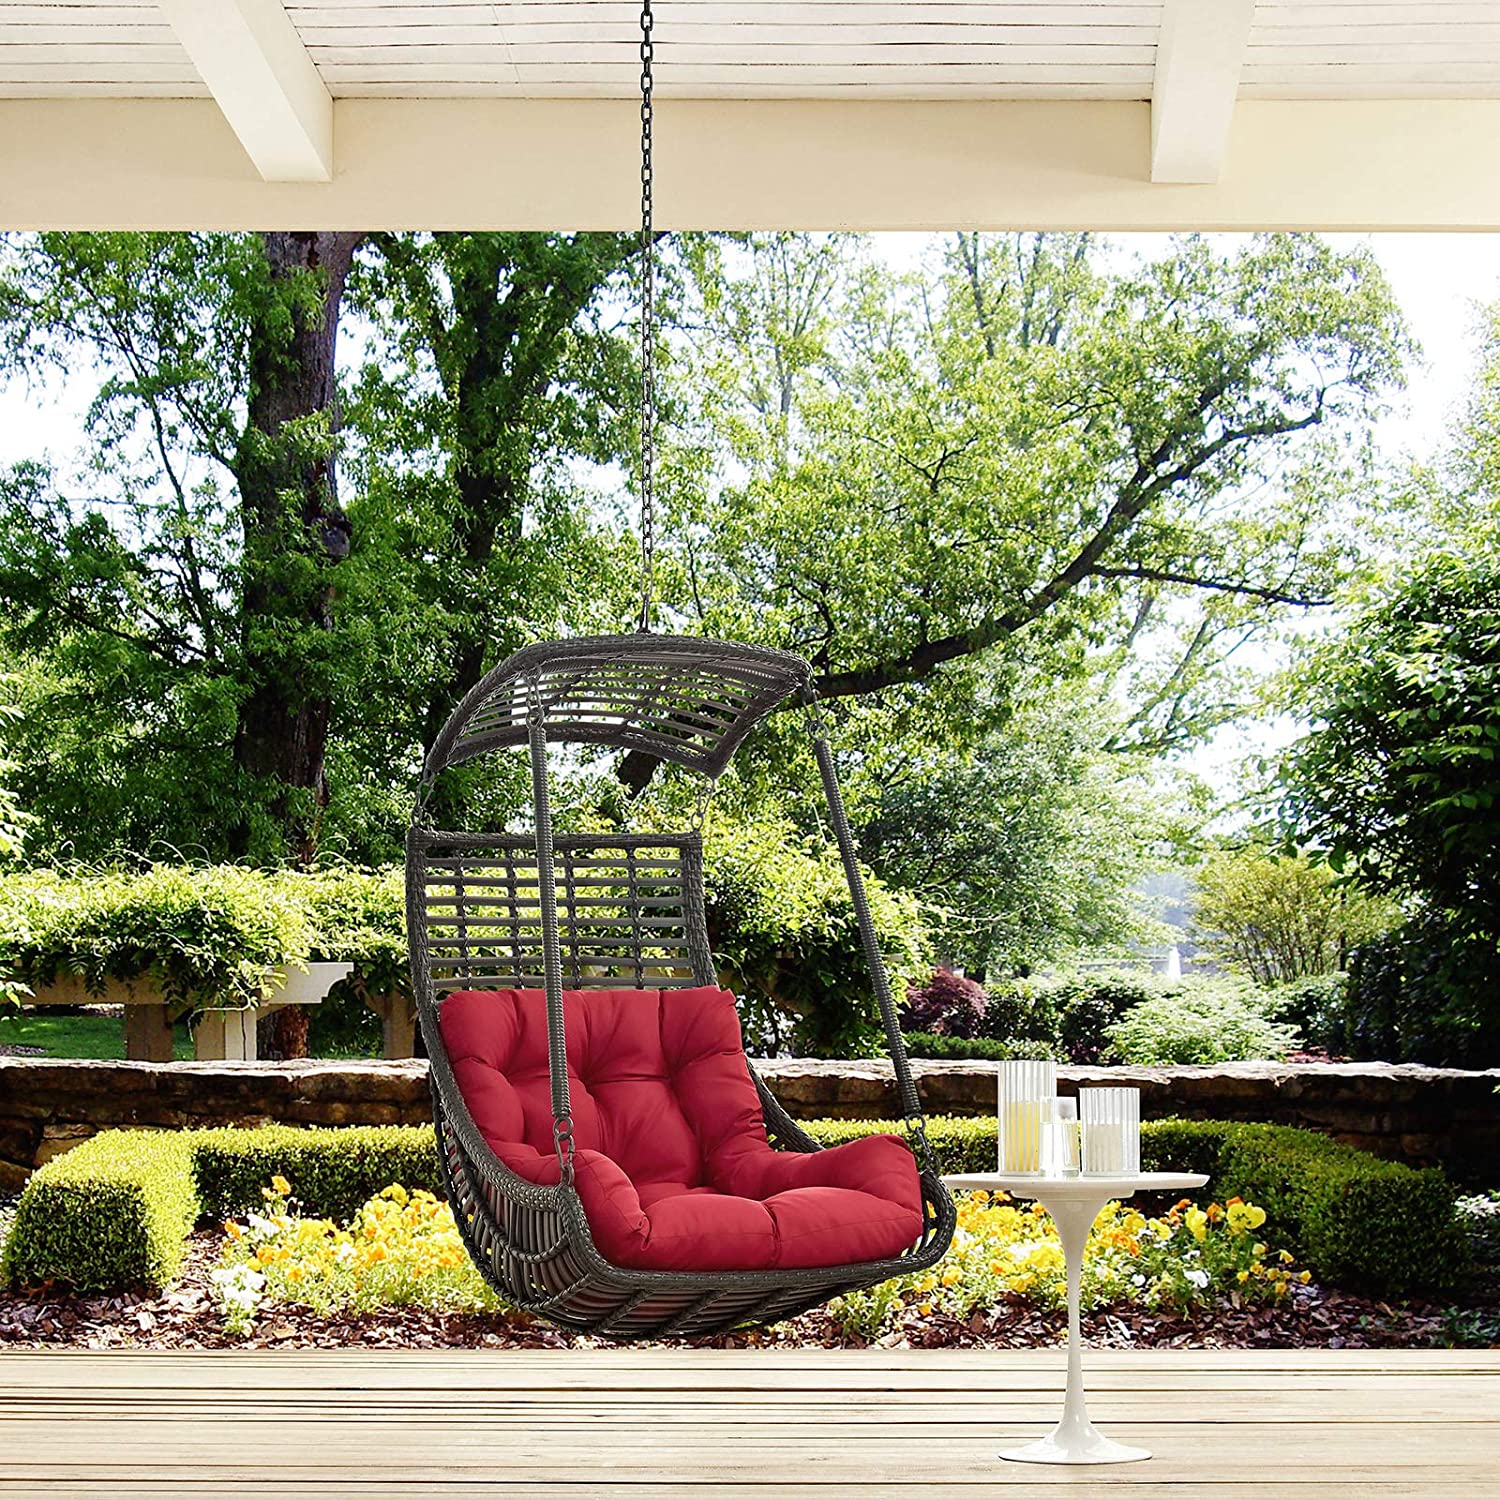 Modway EEI-2655-RED-SET Jungle Outdoor Patio Swing Chair Set with Hanging Steel Chain, Without Stand, Red